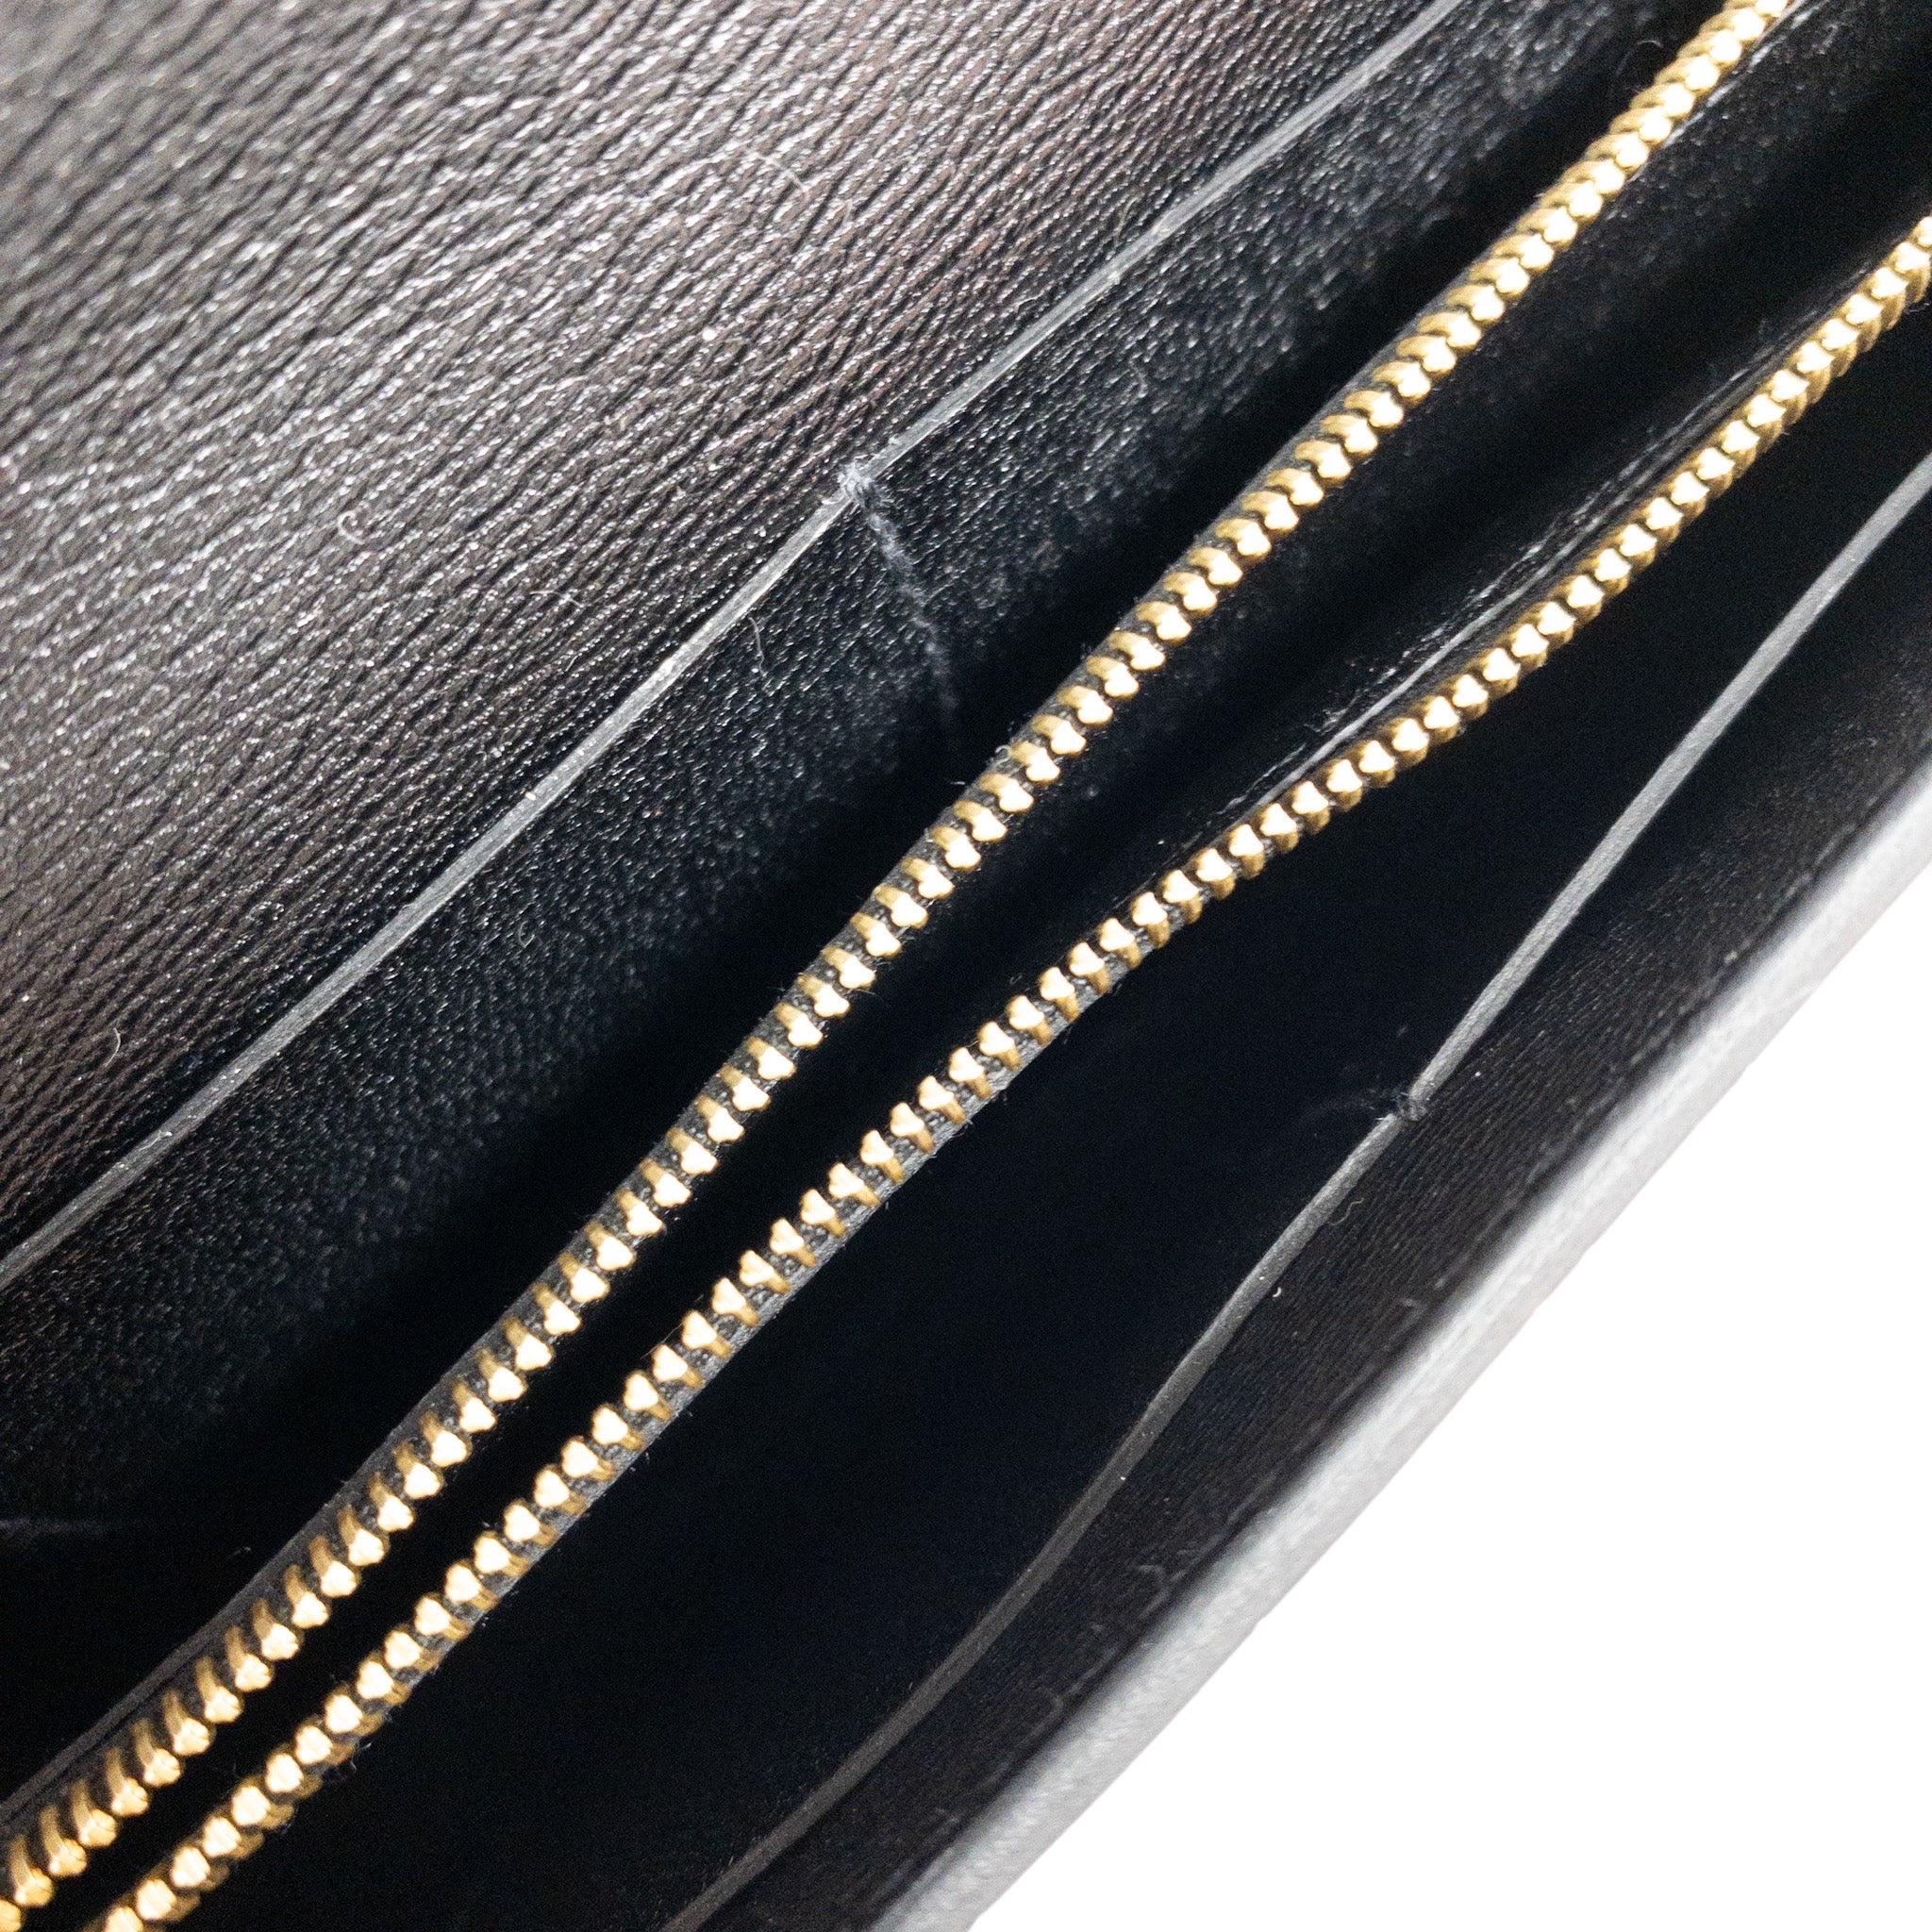 Consign of the Times presents this Hermes Kelly To Go Wallet with strap in black shiny Mississippian Alligator. Detachable leather strap. Four interior card slots and zipped compartment inside. Lined with leather.  

Size: 8 x 4.5 x 1 Drop-